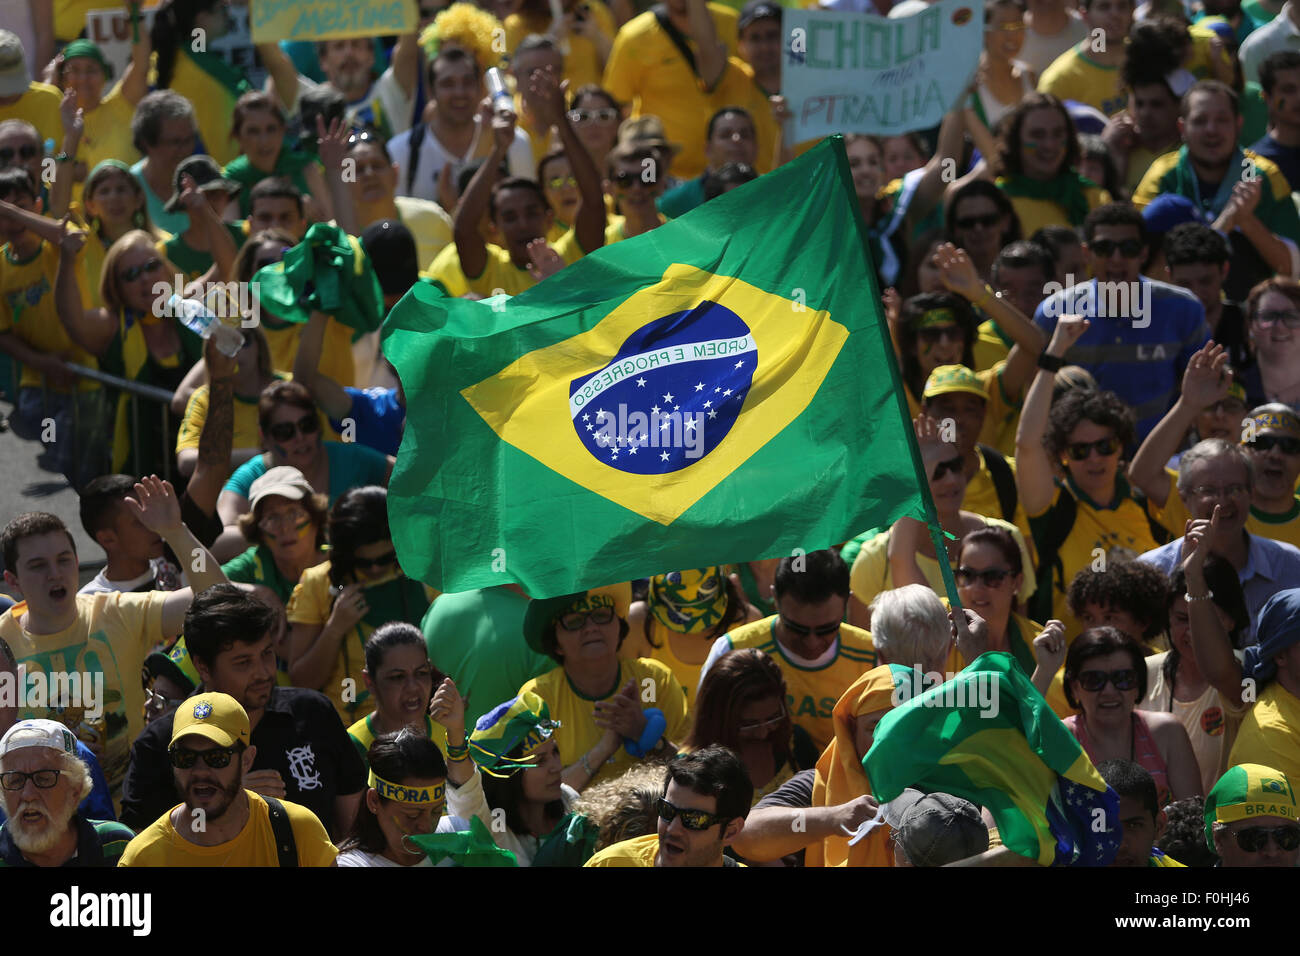 Sao Paulo, Brazil. 16th Aug, 2015. Demonstrators take part in a protest against the corruption scandal in Petrobras and demand for the impeachment of Brazil's President Dilma Rousseff, in Sao Paulo, Brazil, on Aug. 16, 2015. According to local press, the anti-government protests were carried out at least in 200 cities around the country. © Rahel Patrasso/Xinhua/Alamy Live News Stock Photo